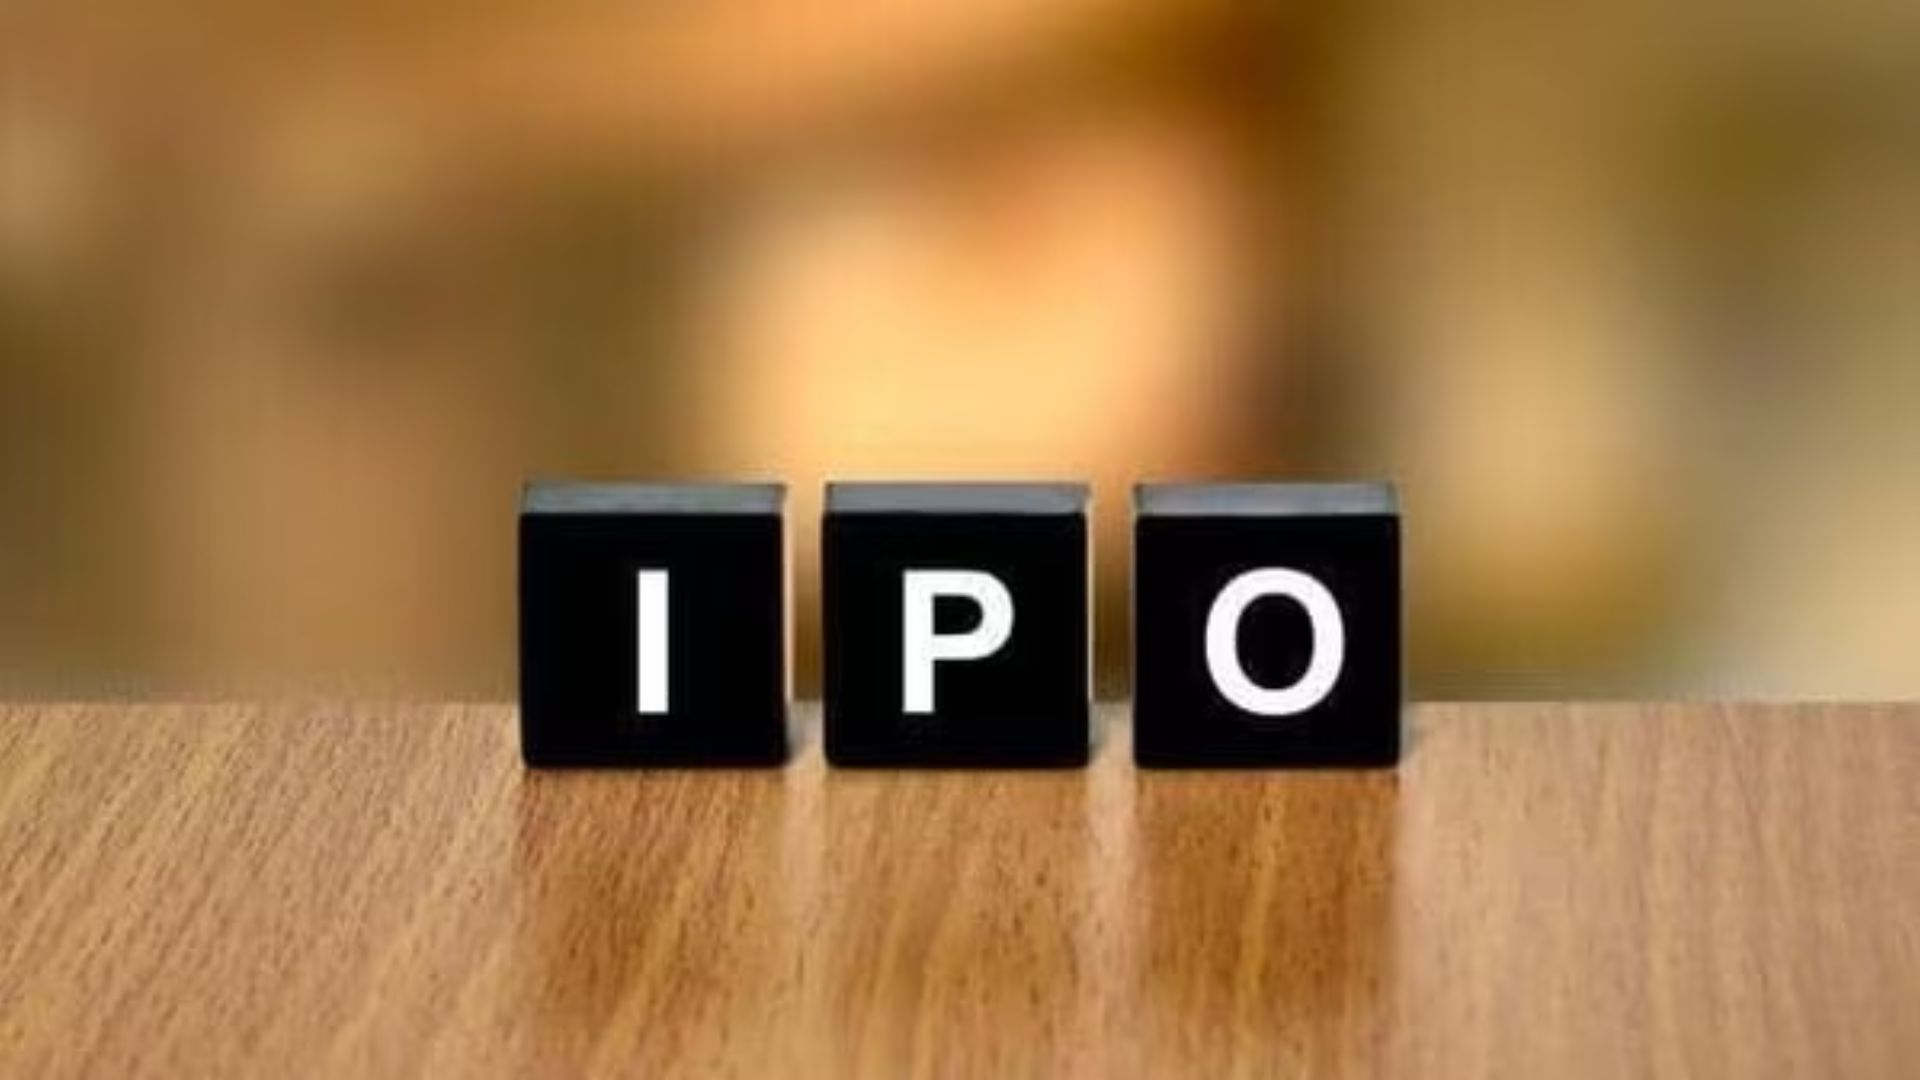 Tata Tech IPO allotment Here's how to check status and latest GMP